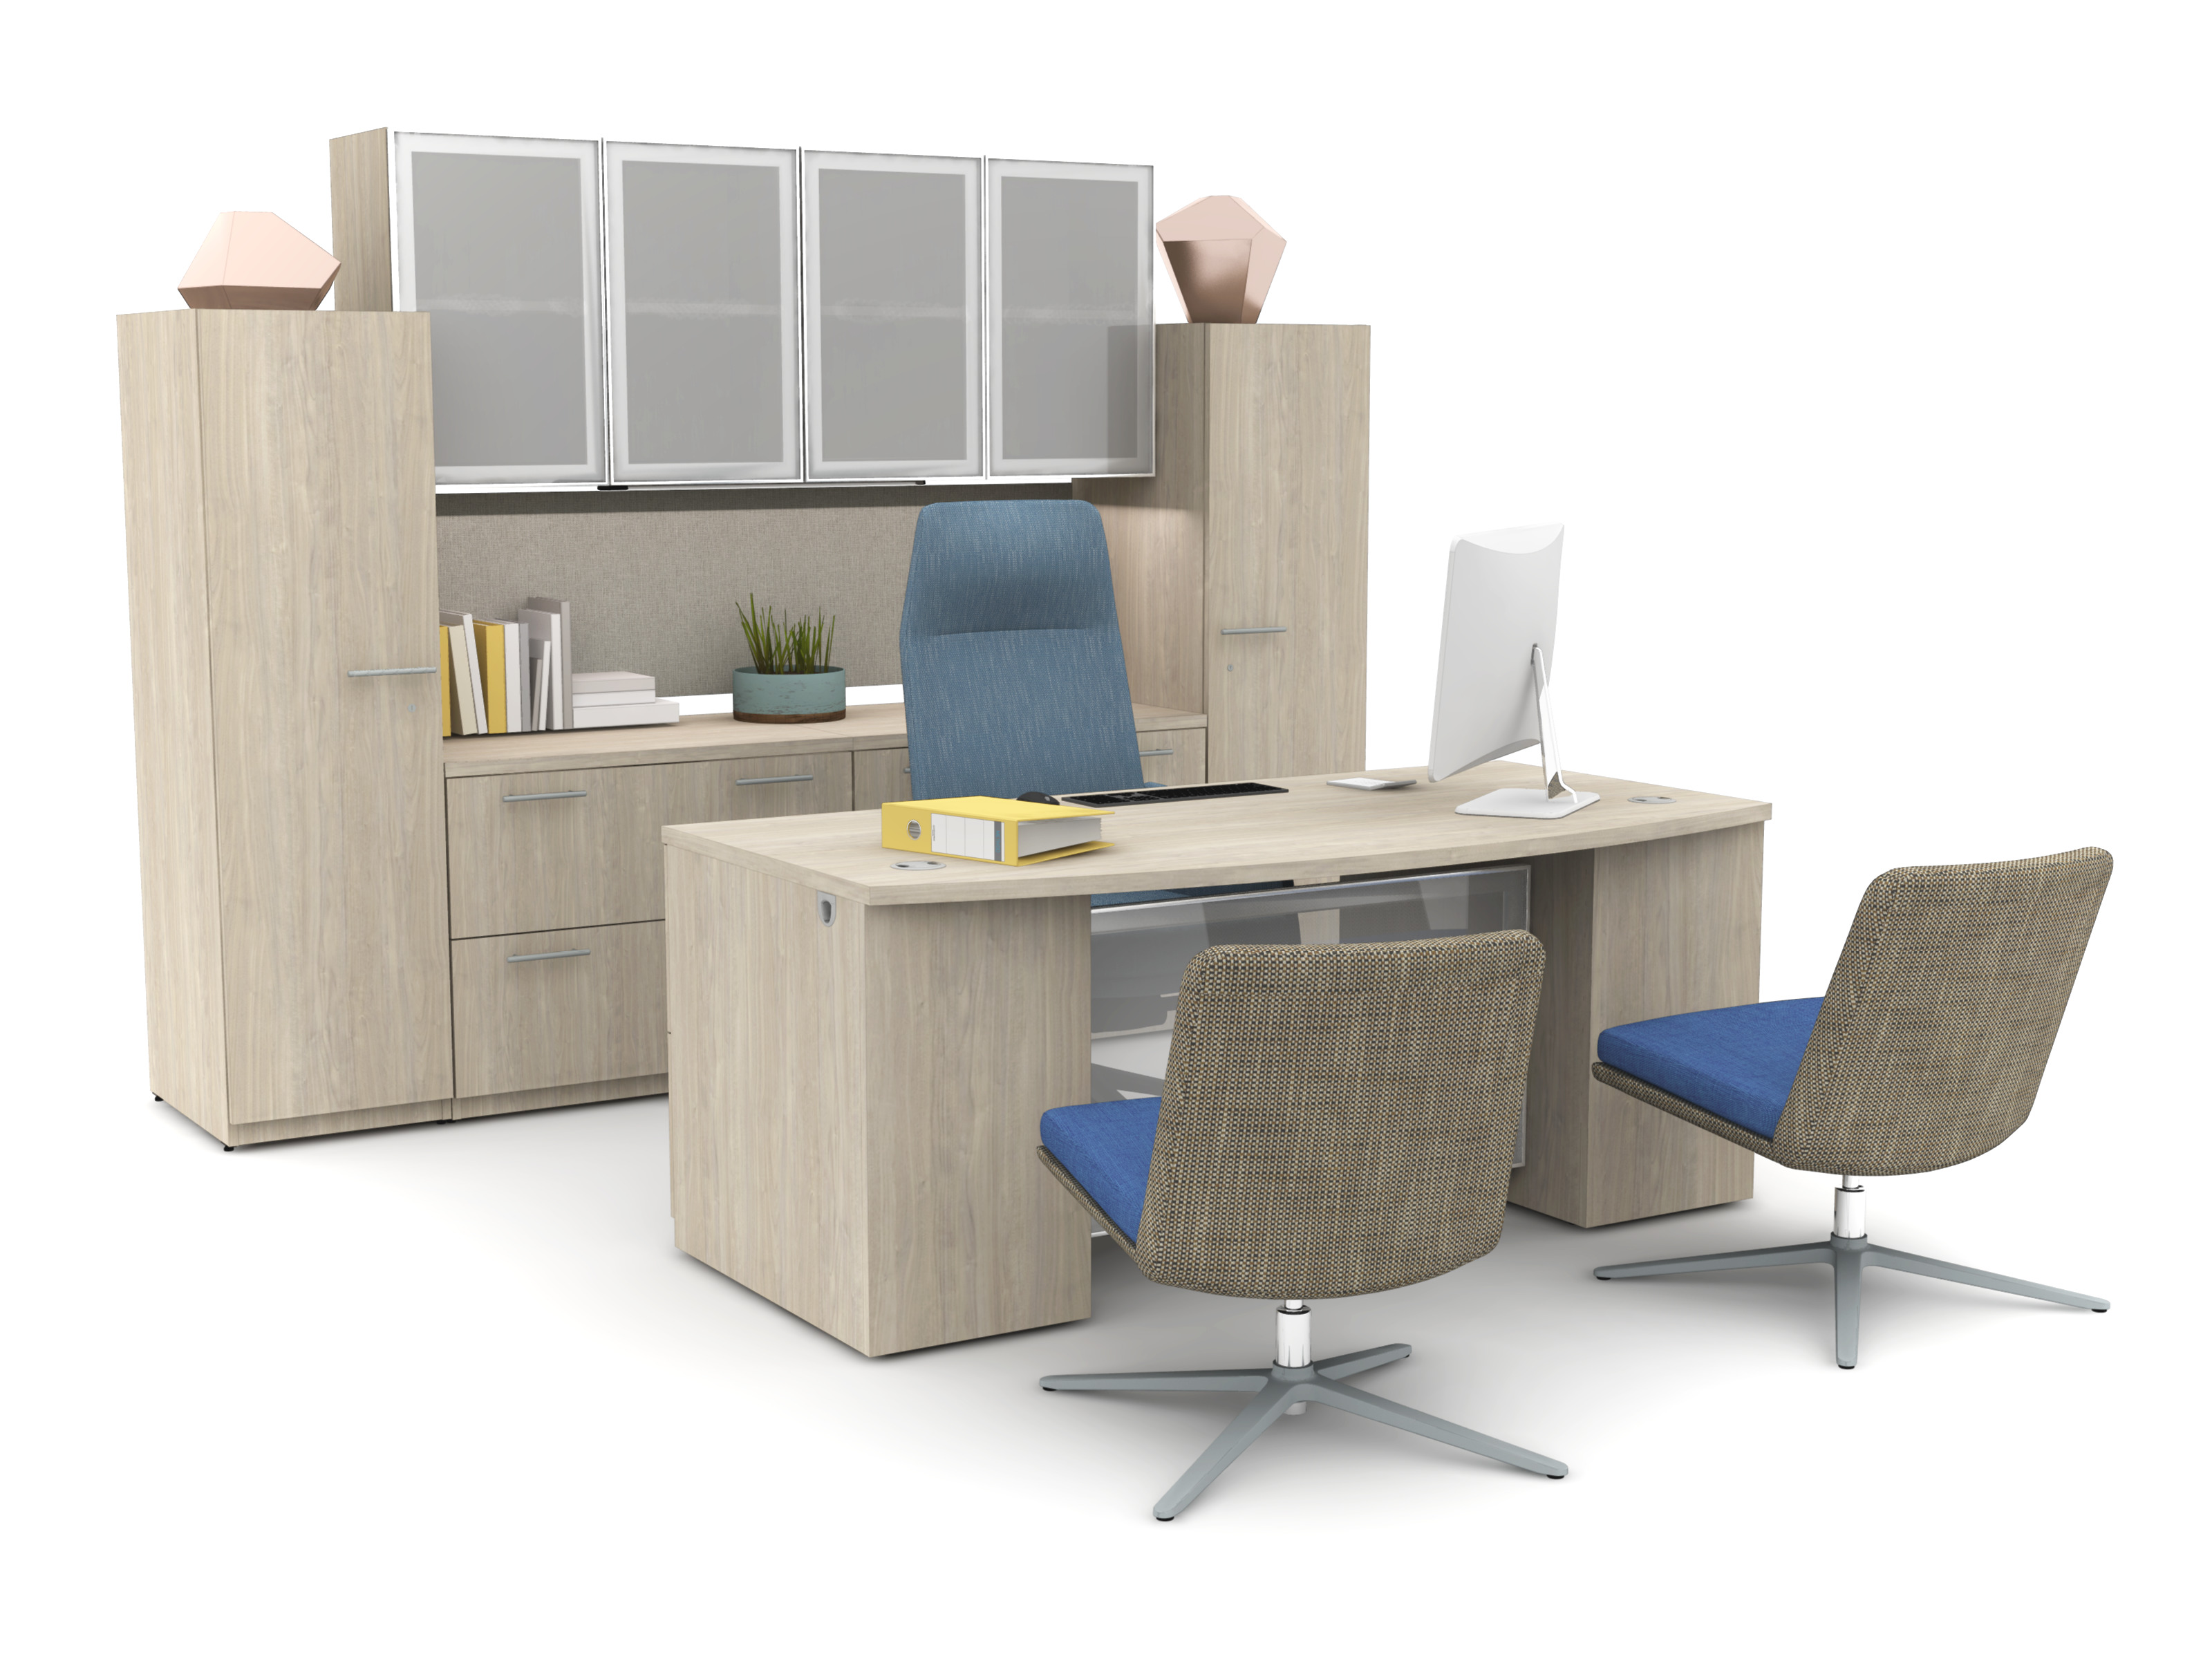 Concinnity - Executive Freestanding Desk Planning Typical